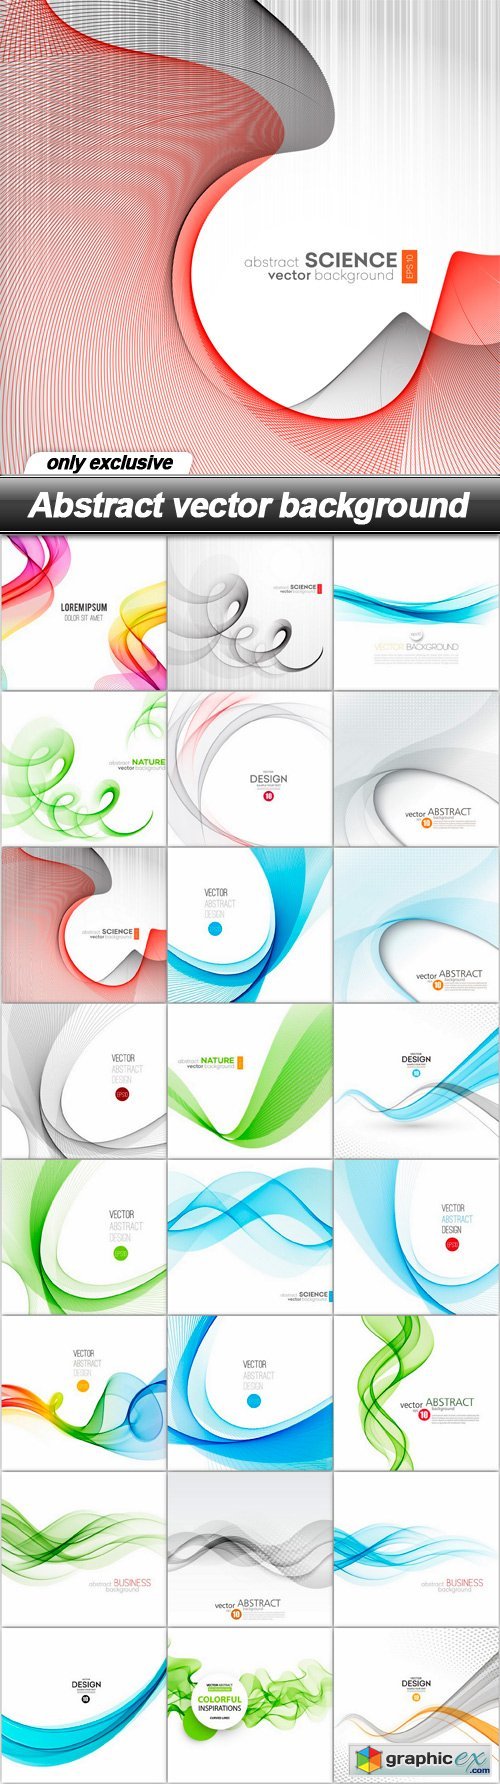 Abstract vector background - 24 EPS